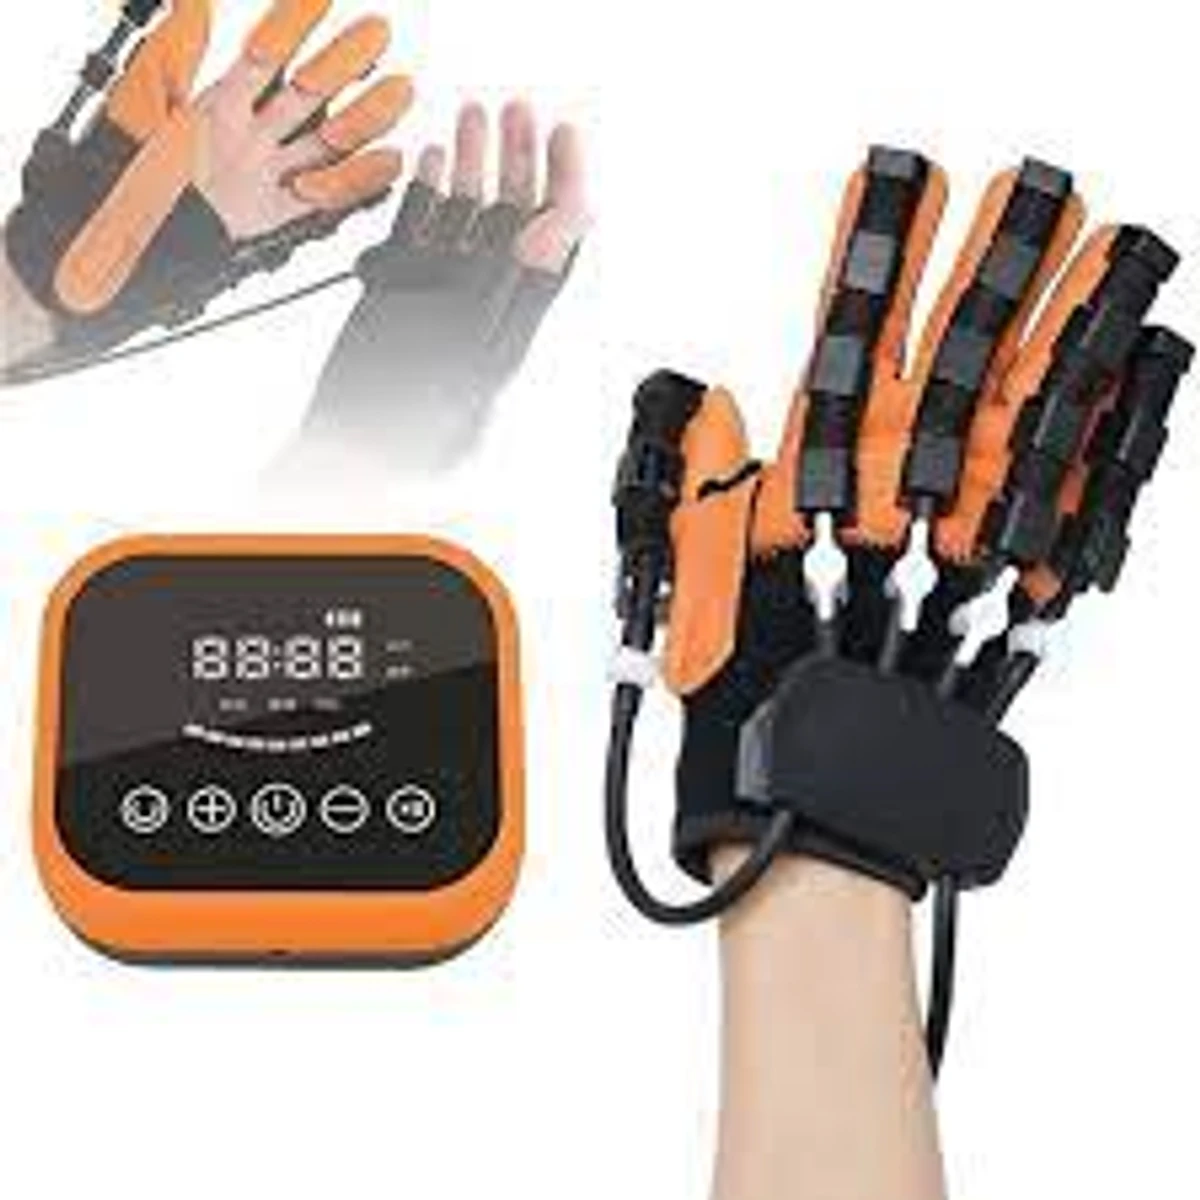 Robotic Glove for Hand Paralysis